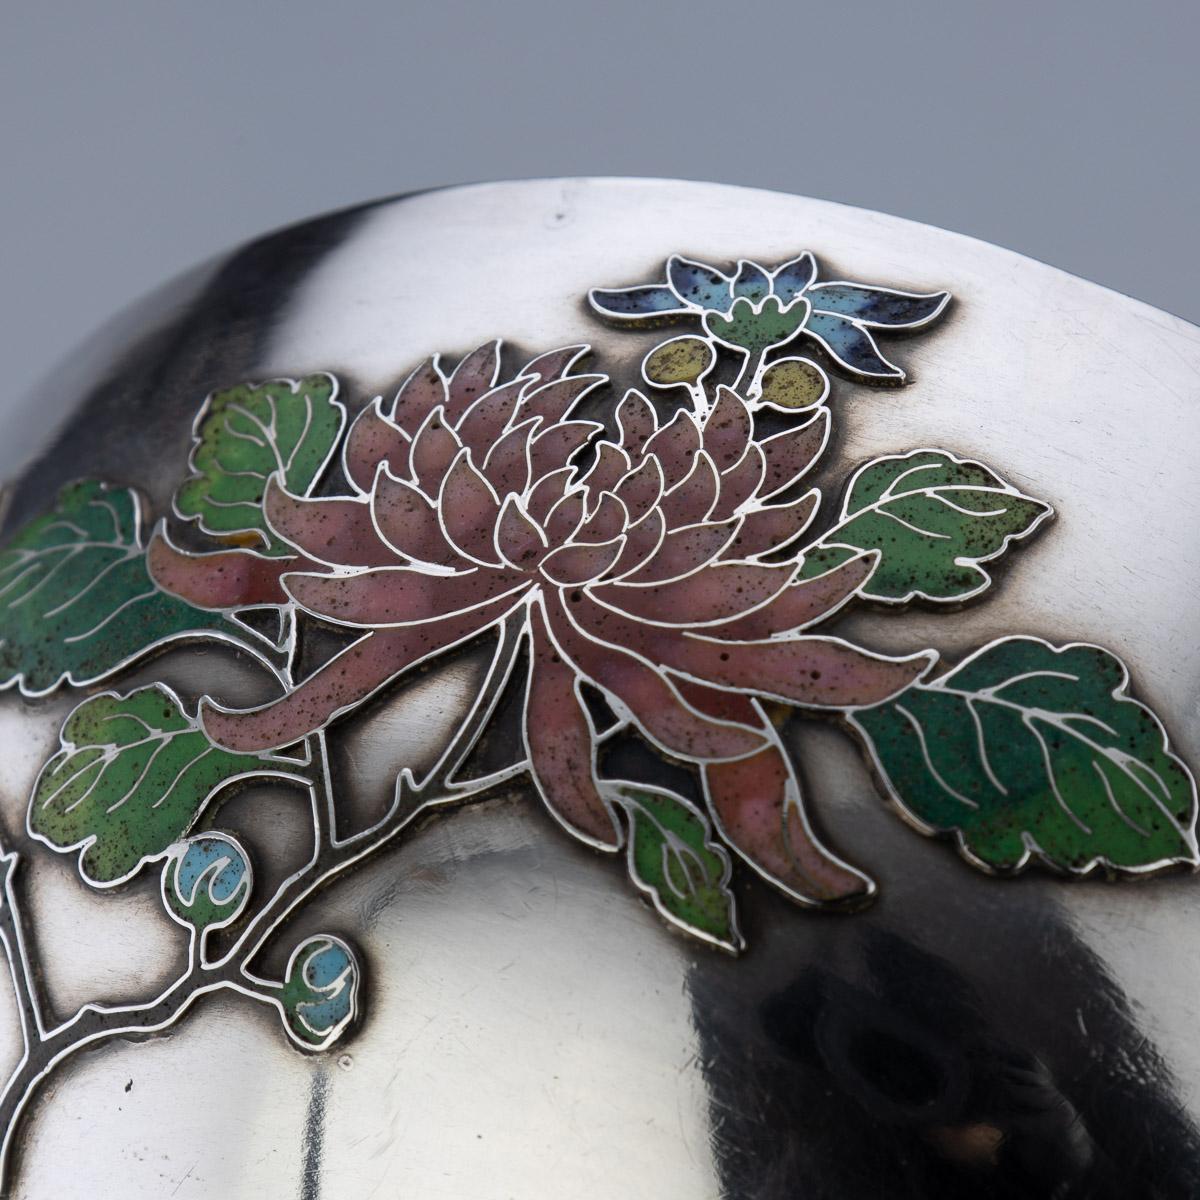 19th Century Rare Chinese Export Solid Silver & Enamel Bowl, Wang Hing, c.1890 For Sale 9